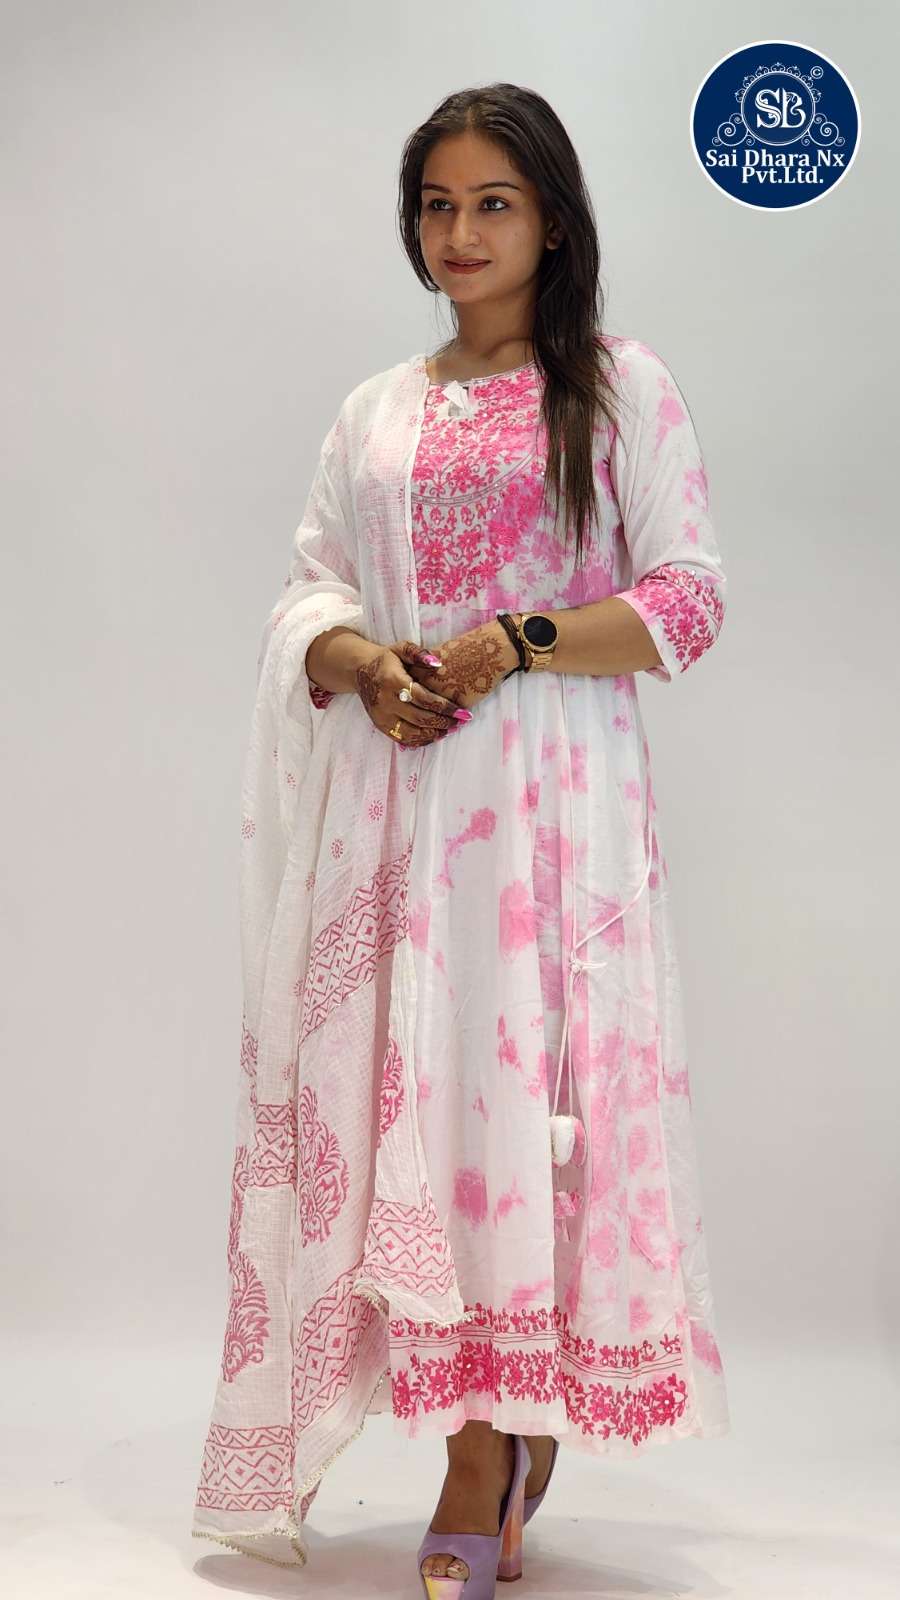 SAIDHARANX PRESENTS PURE COTTON LATEST DESIGN PRINTED WHITE & PINK 2 PIECE READYMADE COMBO COLLECTION WHOLESALE SHOP IN SURAT - SaiDharaNx